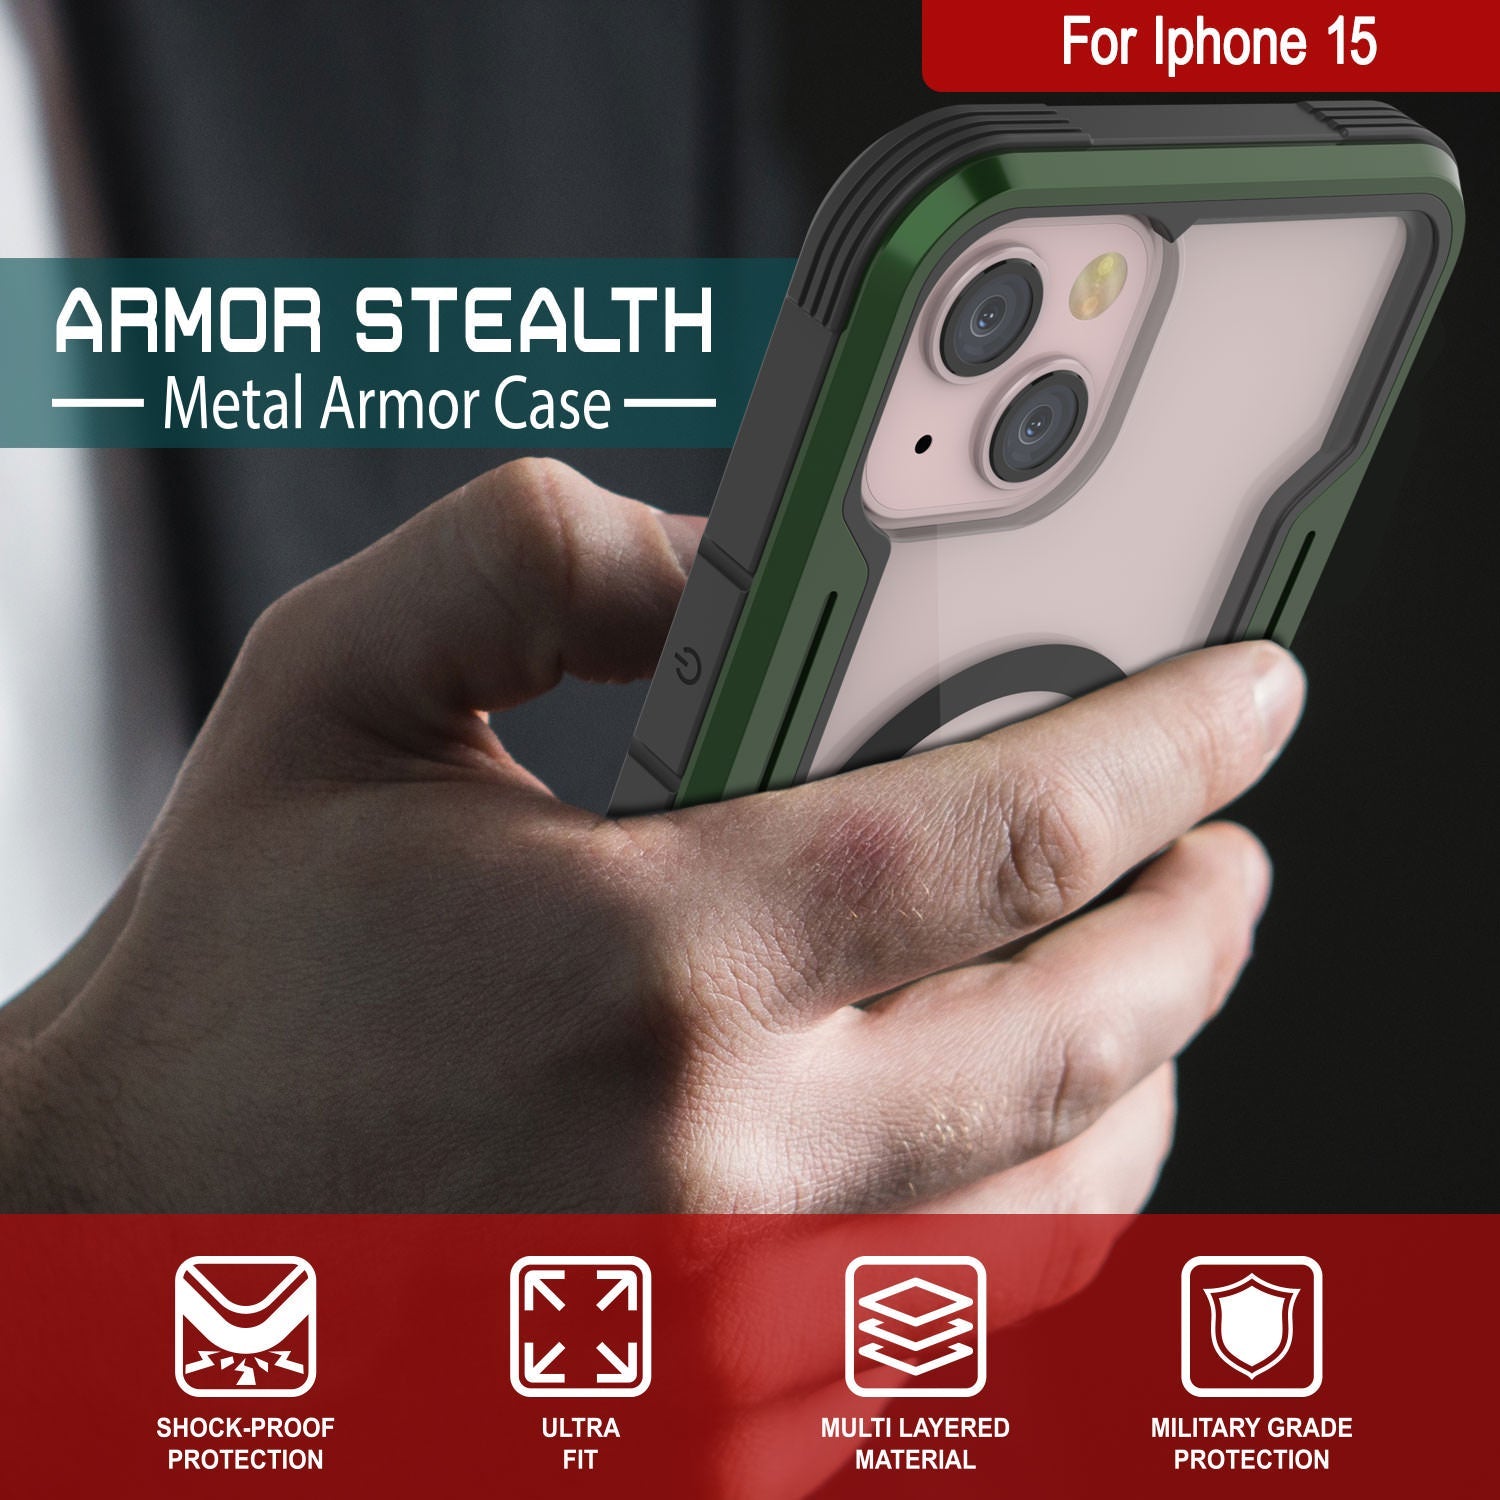 Punkcase iPhone 15 Armor Stealth MAG Defense Case Protective Military Grade Multilayer Cover [Dark Green]